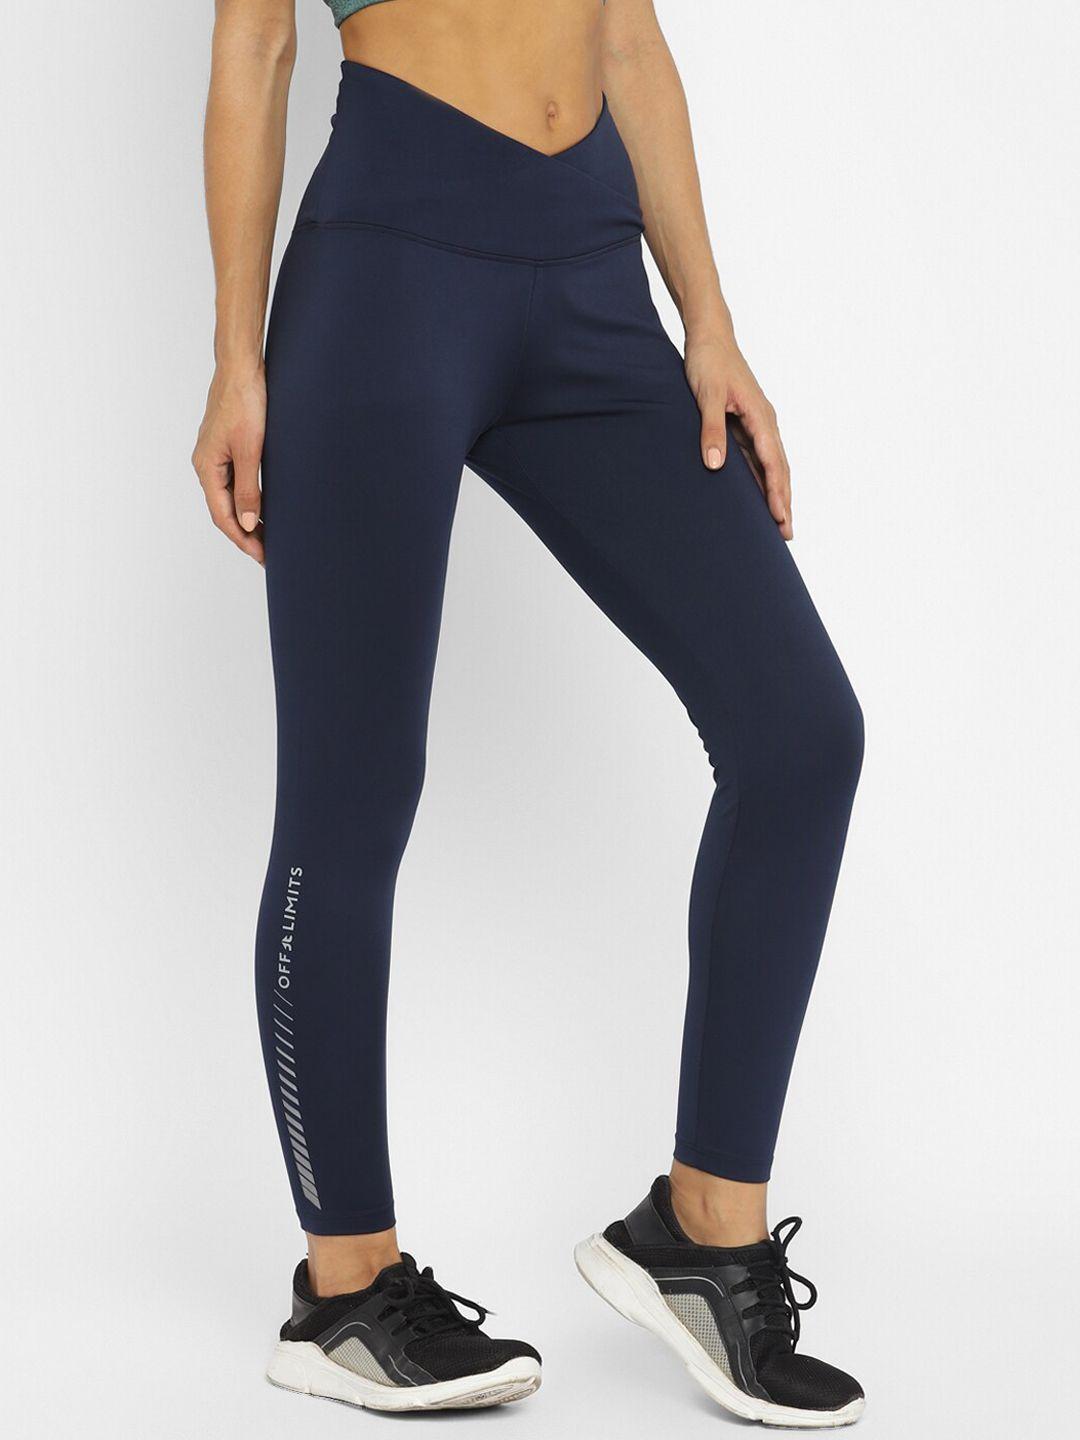 off-limits-women-navy-blue-solid-ankle-length-training-tights